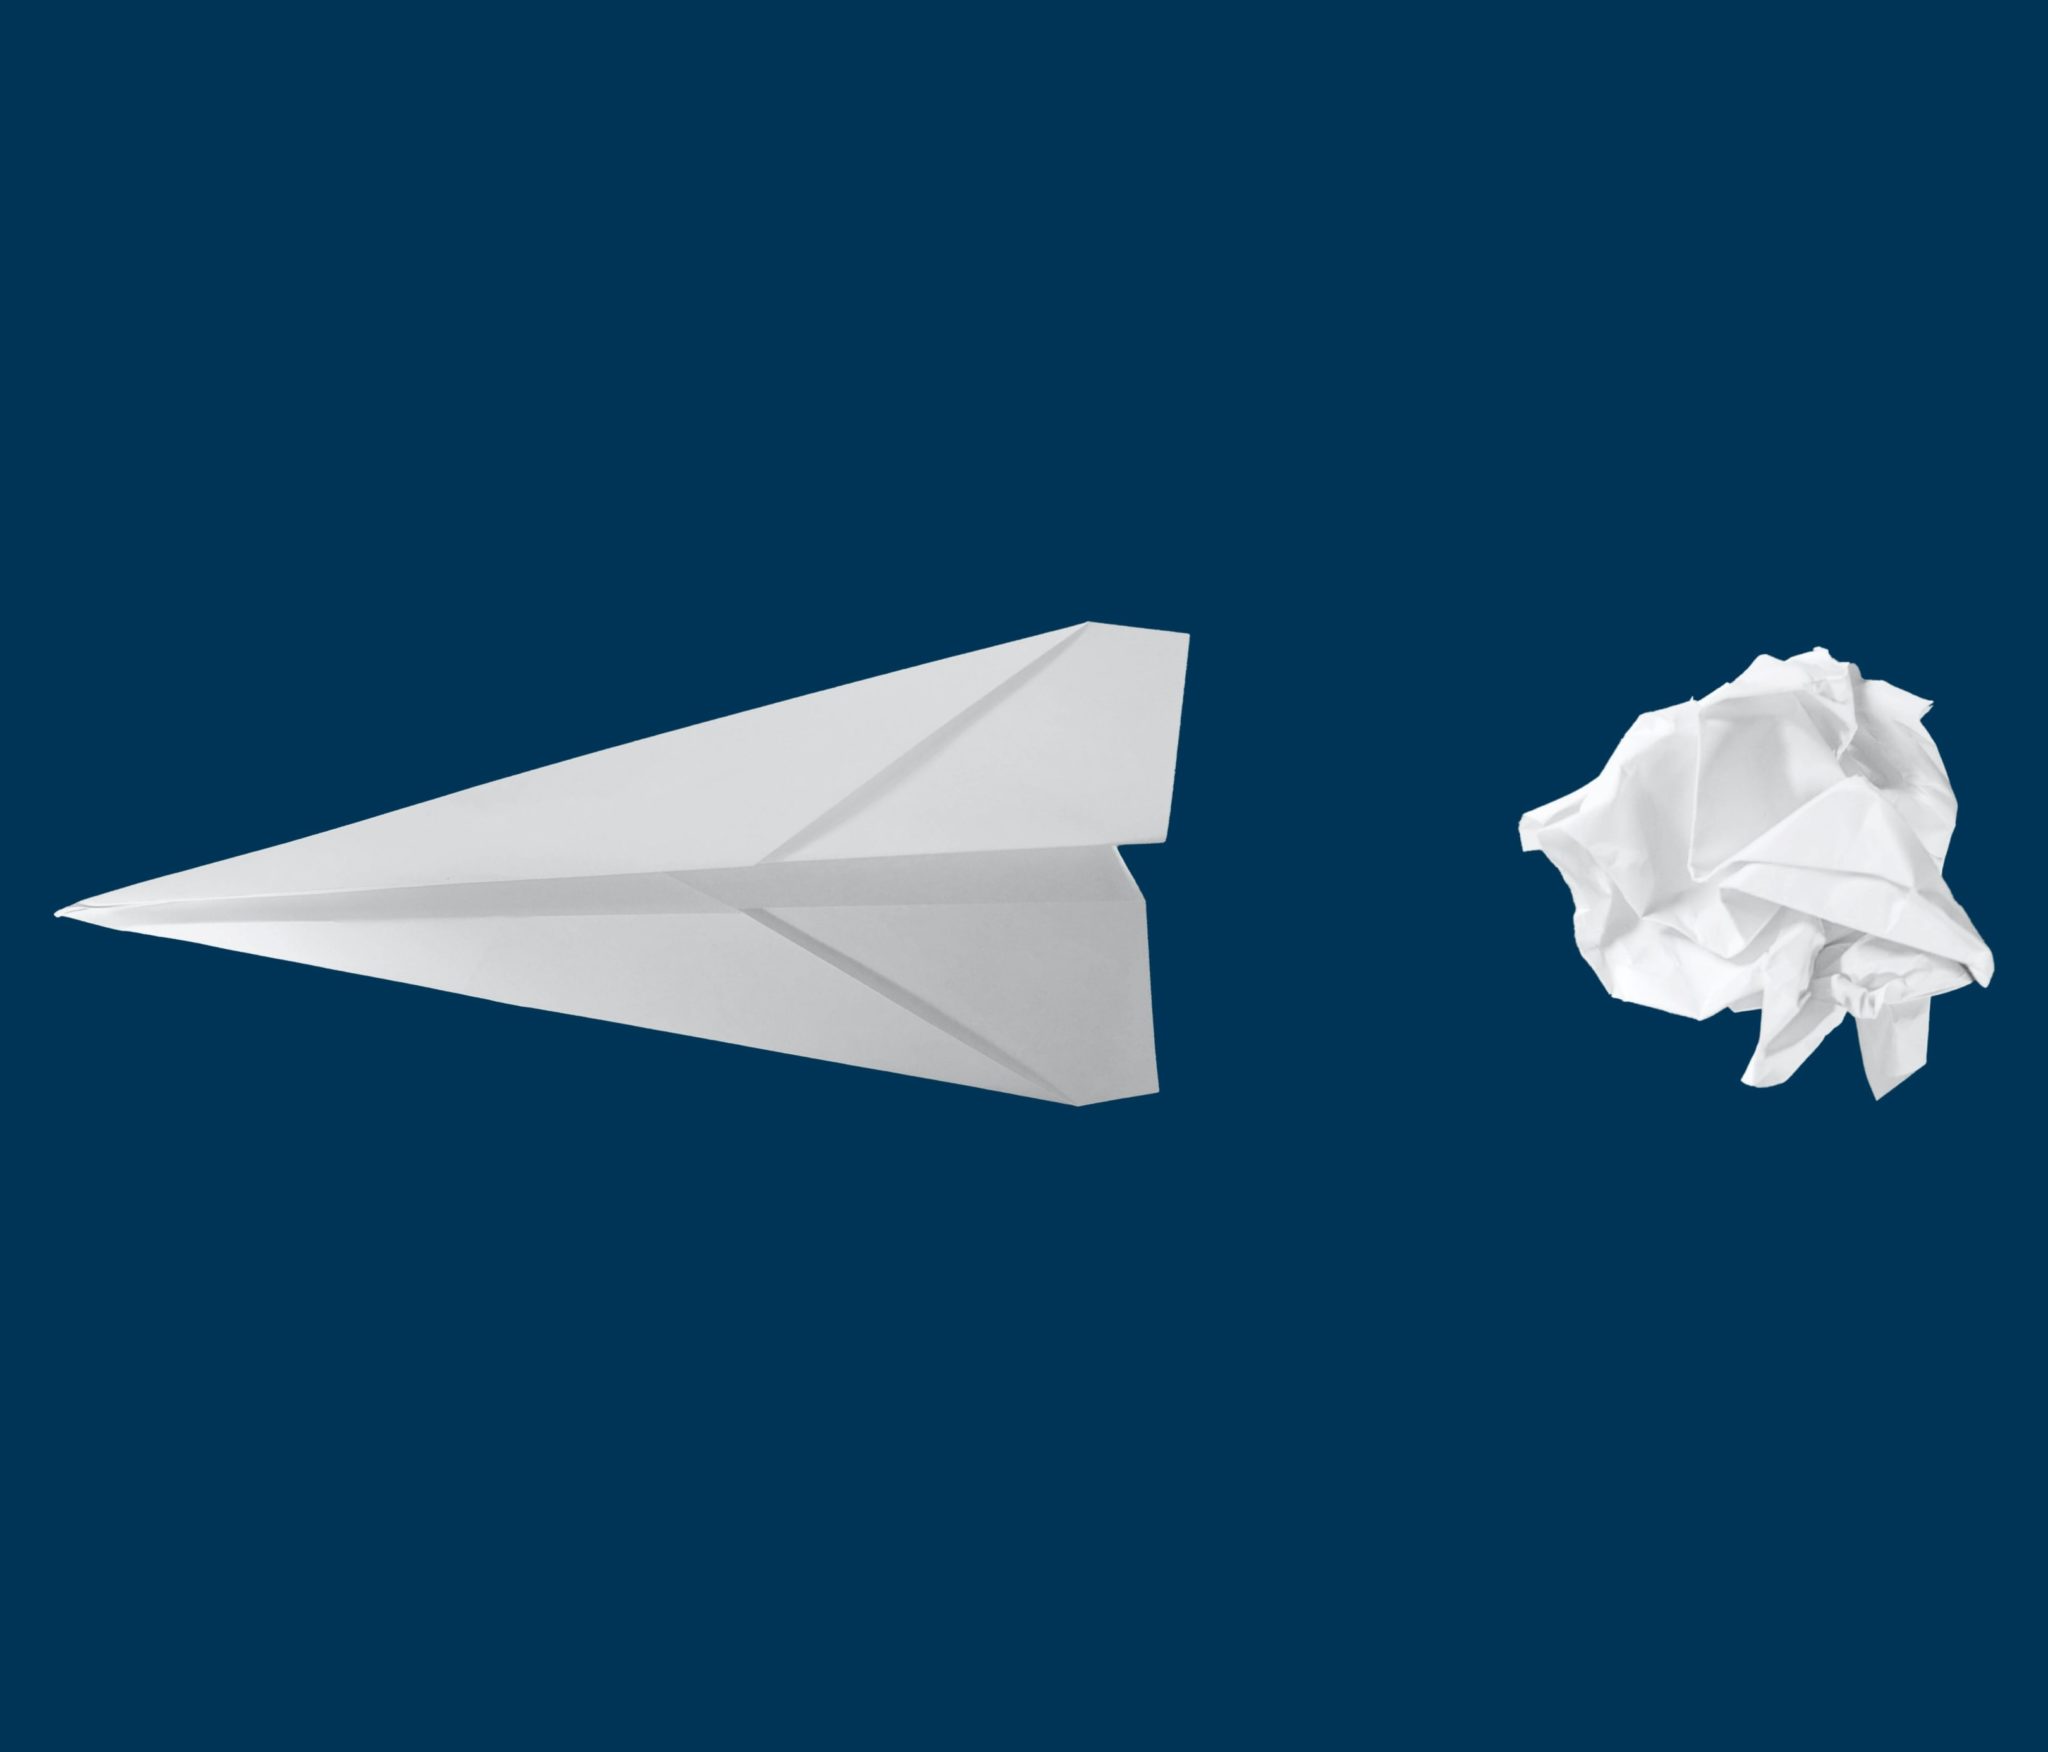 Arrow made of paper airplane and crumpled ball of paper against a dark blue background